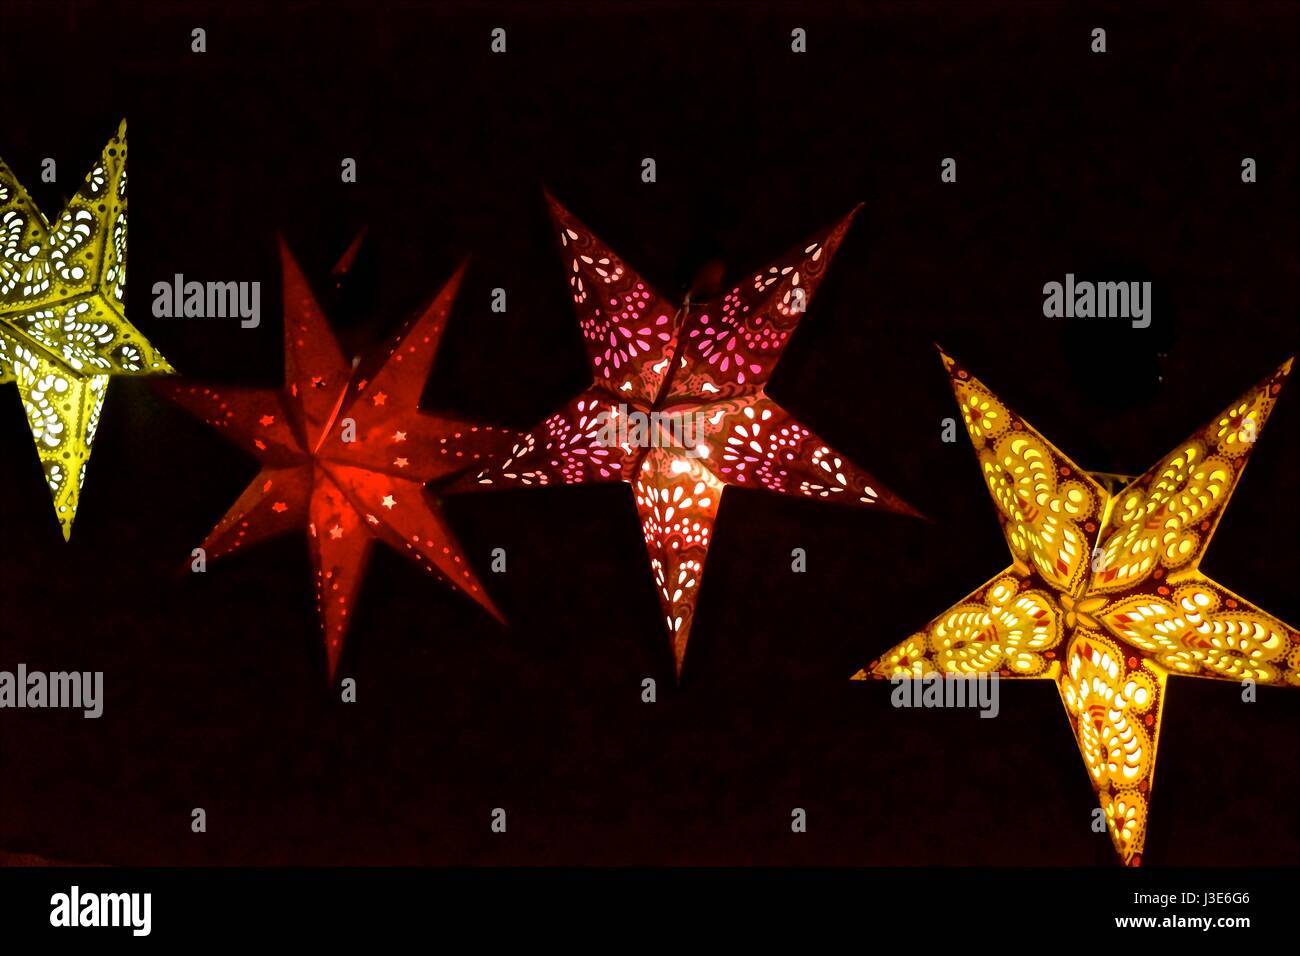 Twinkle twinkle little star, star shaped light fixtures found at a swap meet that is. Stock Photo